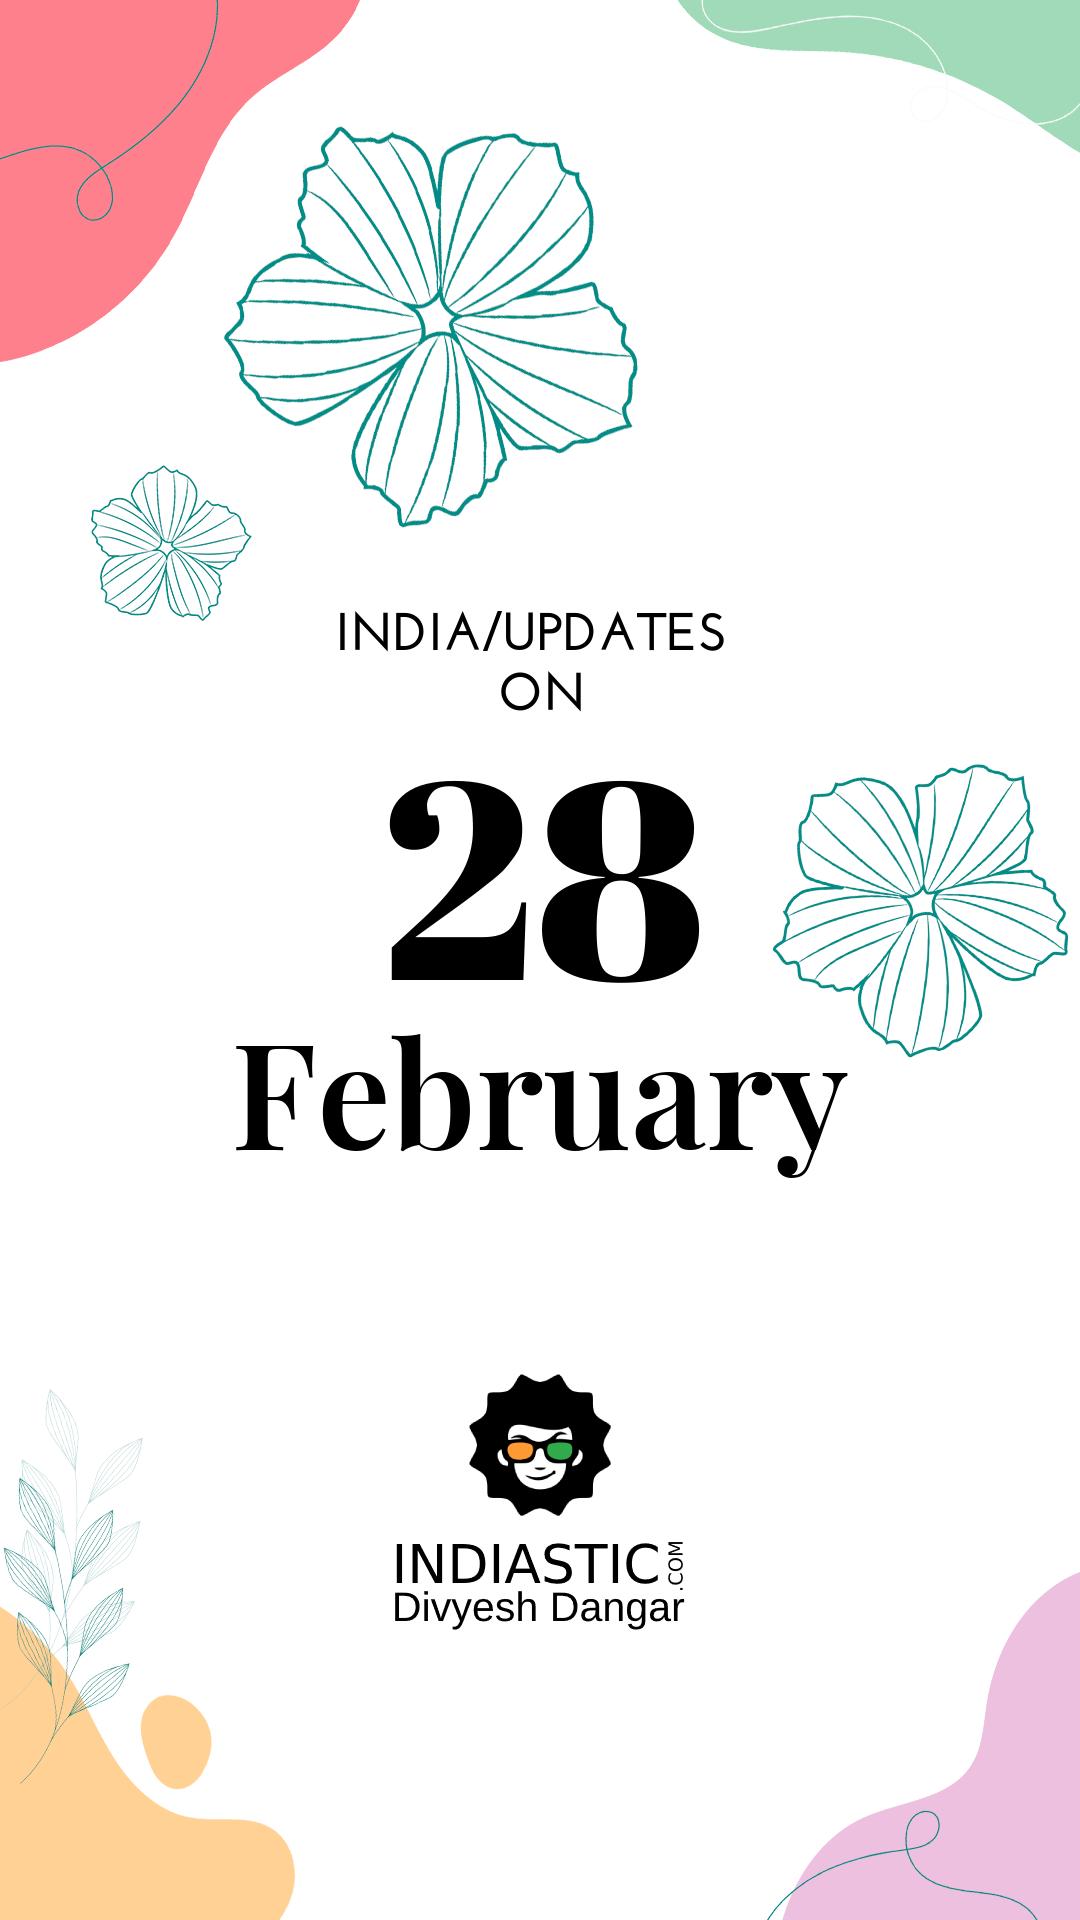 February 28th calender with holiday info and special events